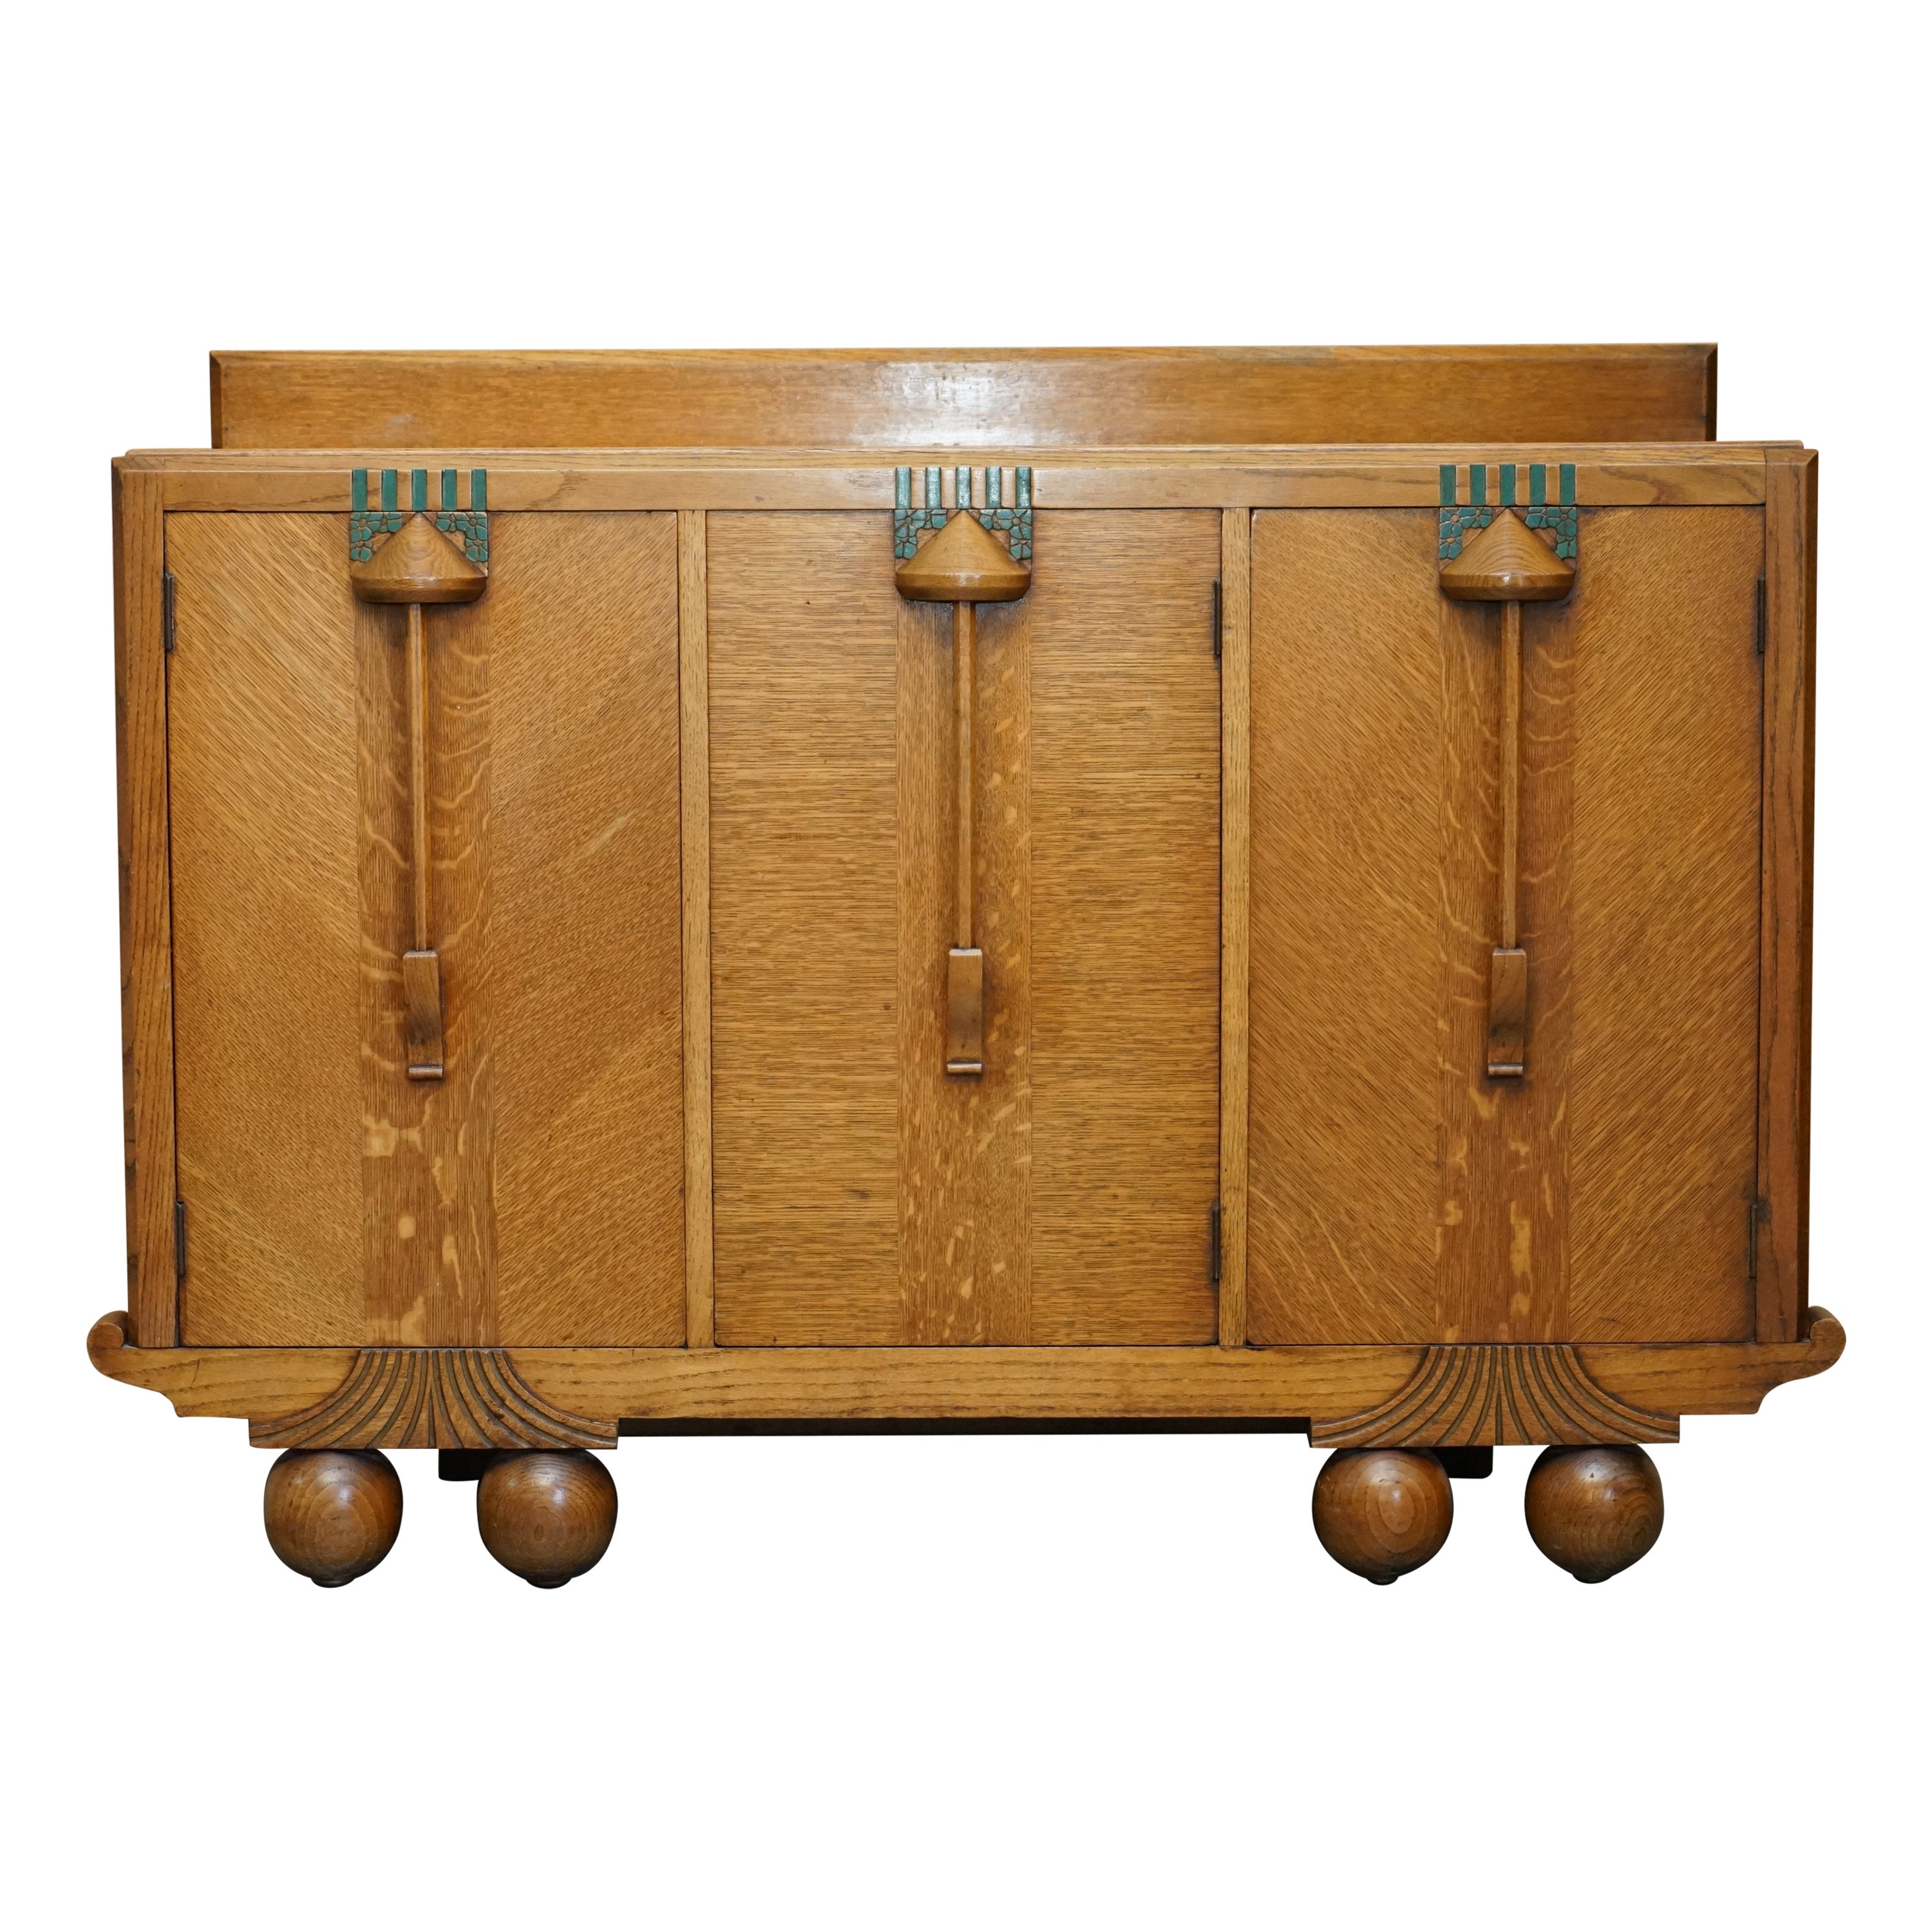 FINE LIBERTY'S COTSWOLD ART DECO OAK CARVED SiDEBOARD CIRCA 1920 PART OF A SUITE im Angebot